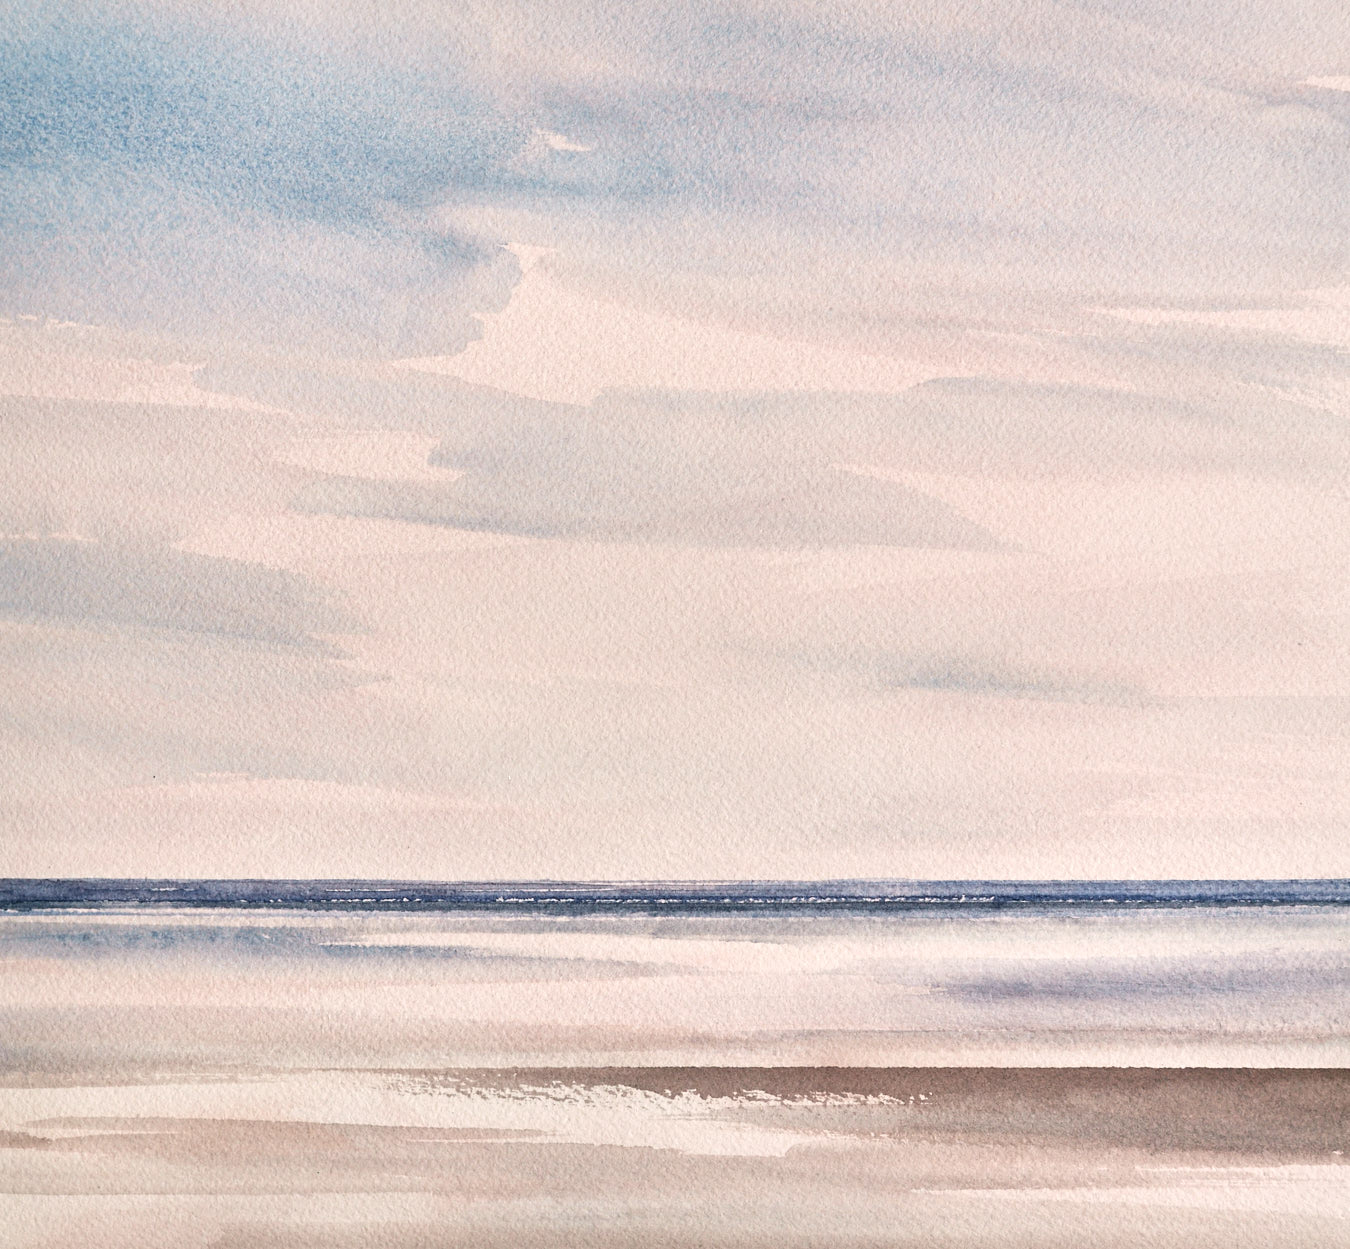 Large image of Light over the shore, St Annes-on-sea original watercolour painting